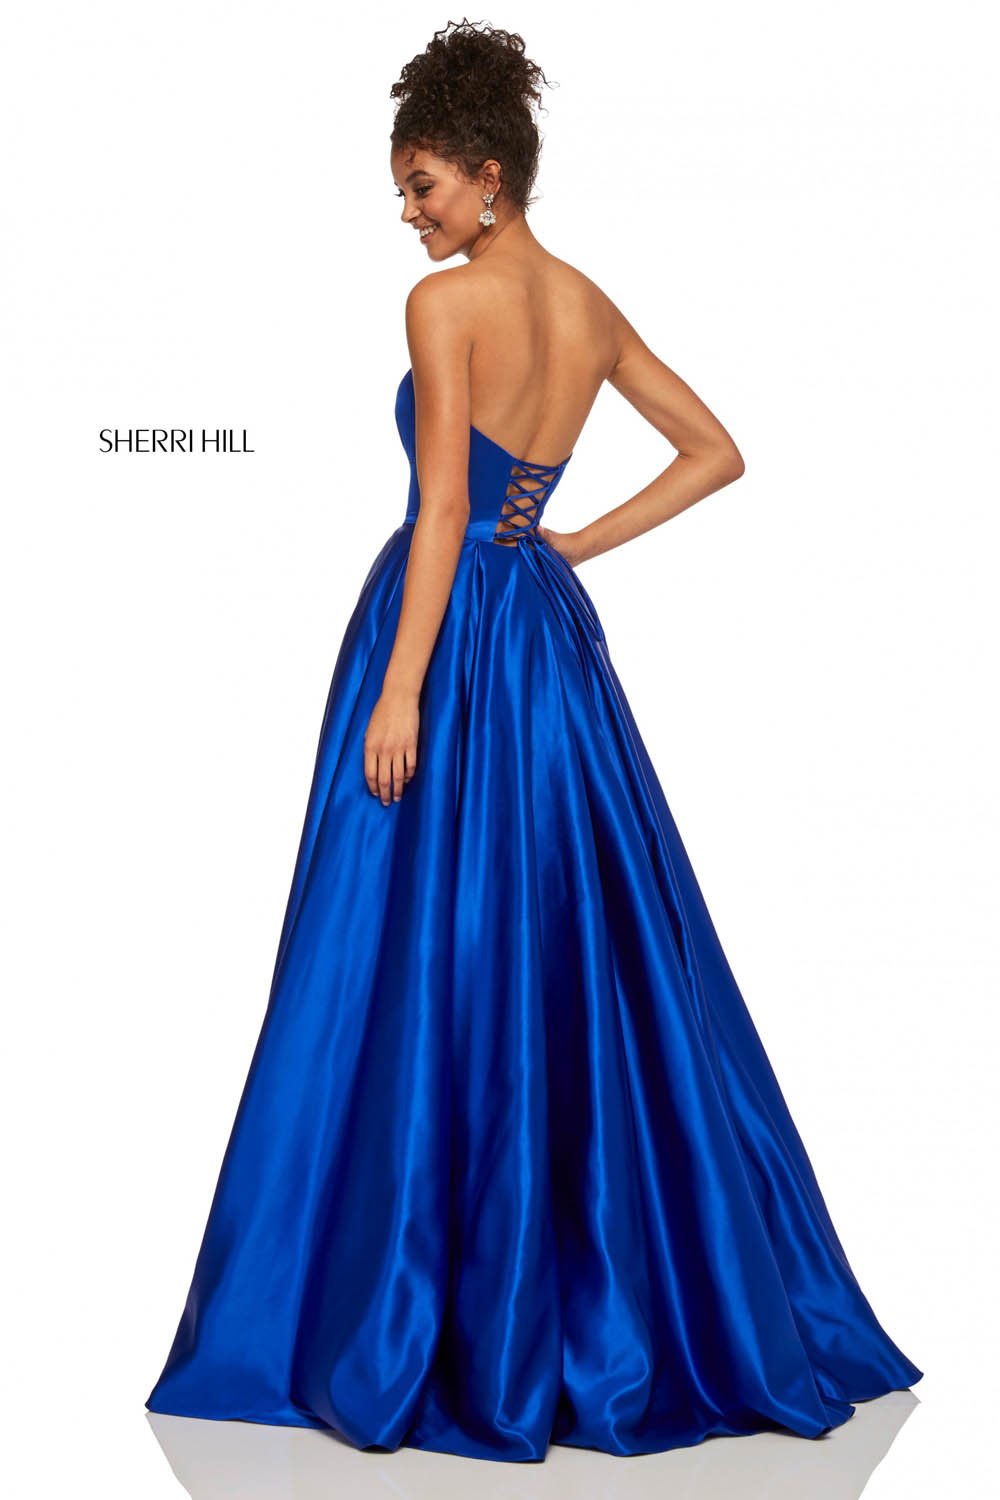 Sherri Hill 52850 dress images in these colors: Yellow, Emerald, Red, Ivory, Lilac, Royal, Light Blue, Navy, Nude, Black.